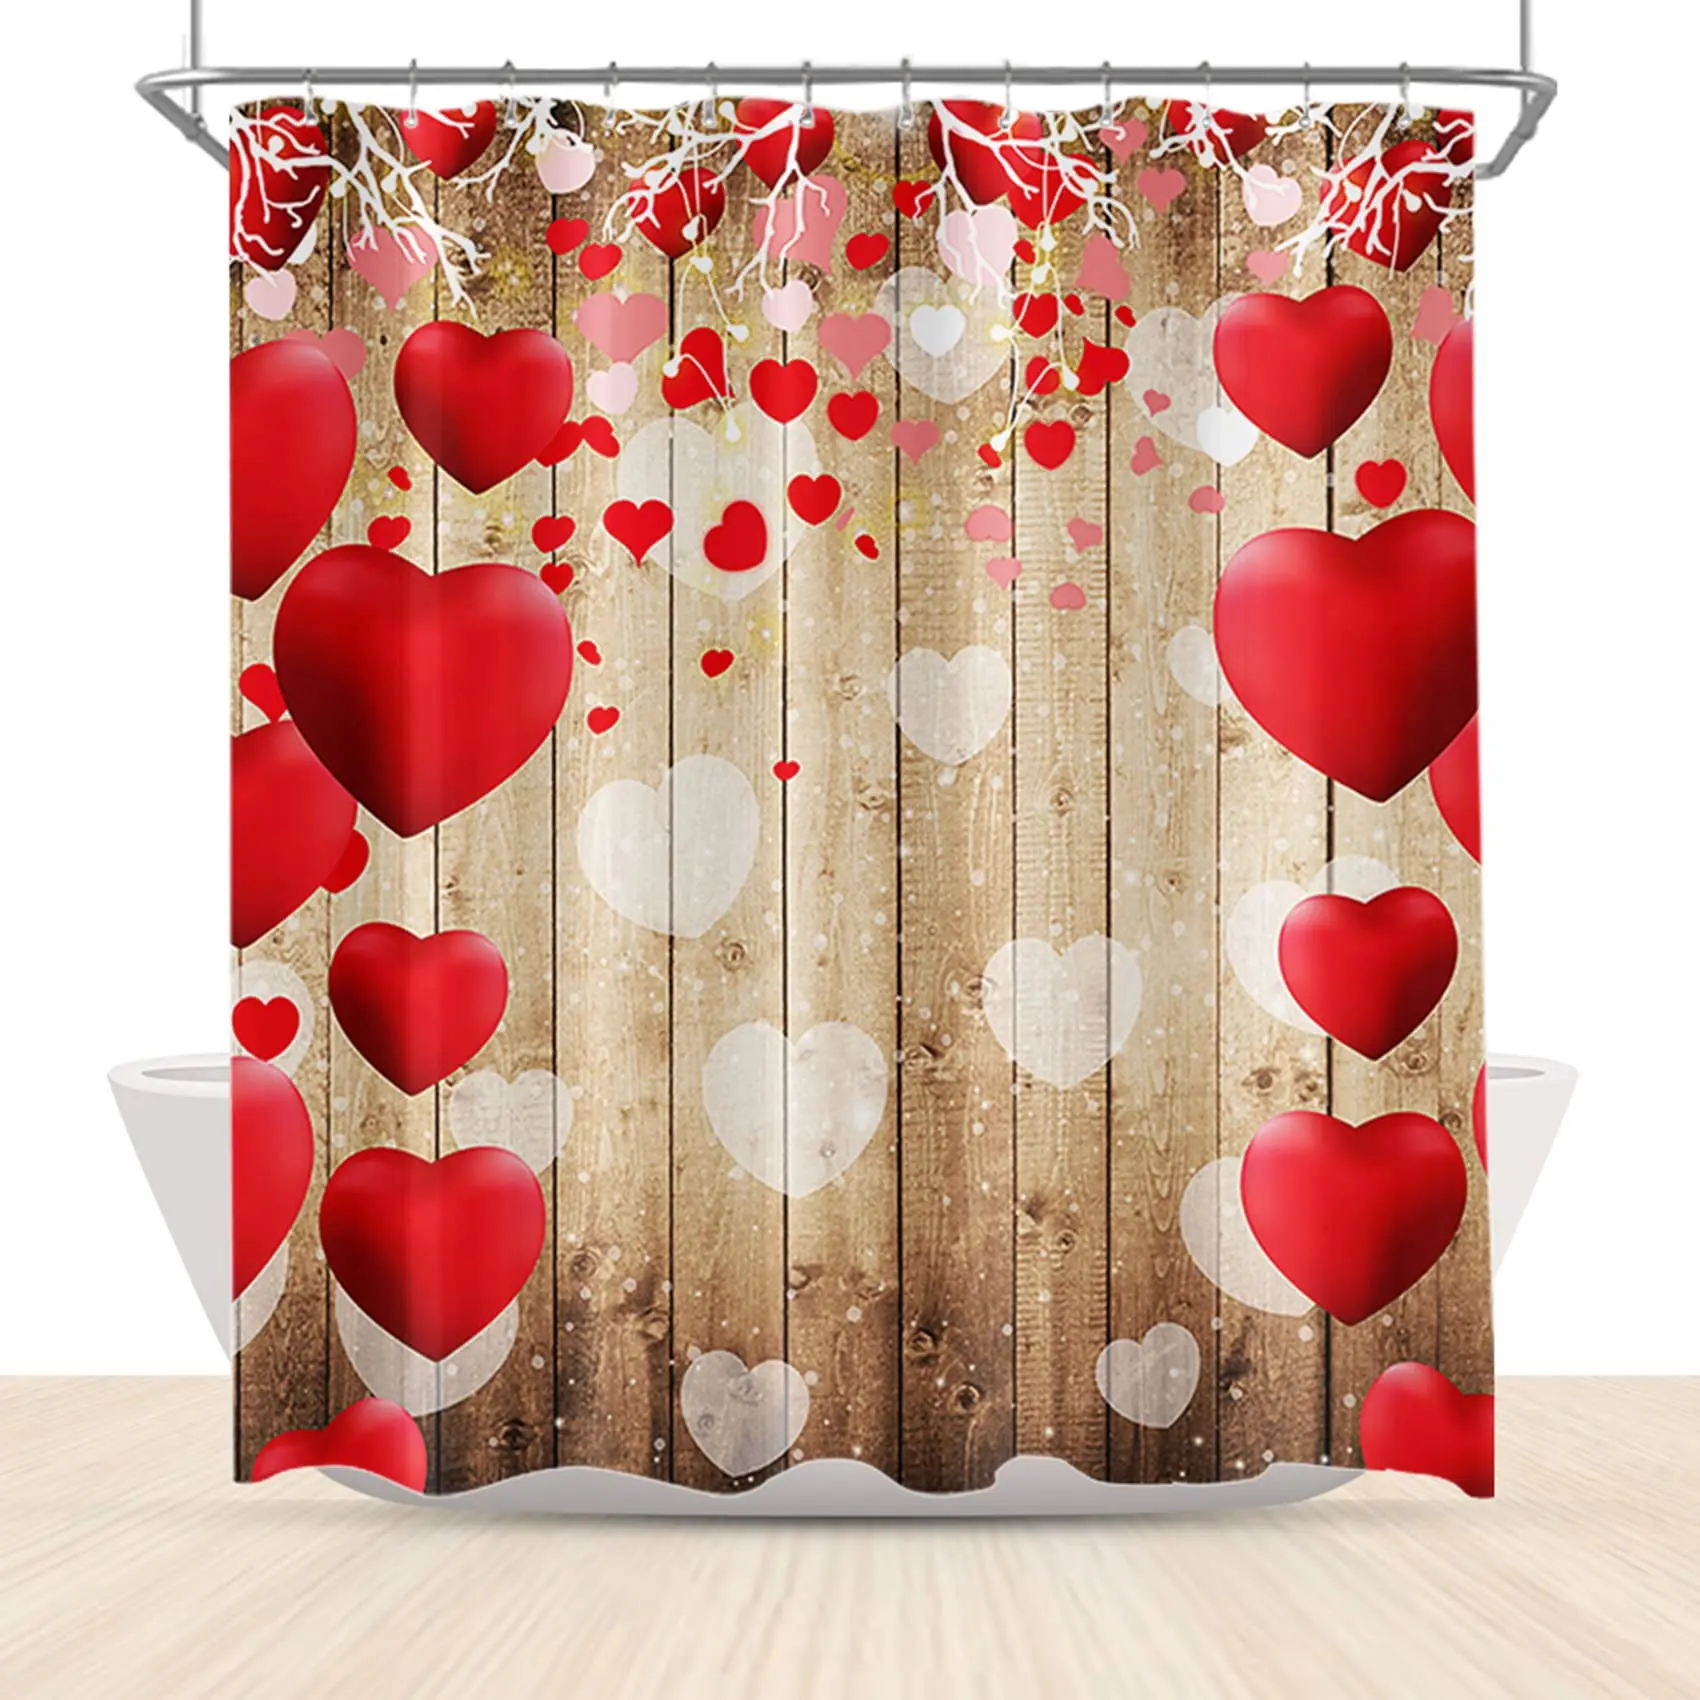 

Romantic Valentines Shower Curtain Love Script Red Hearts Spots Balloons on Vintage Wood Backdrop Valentine's Day Bathroom Sets